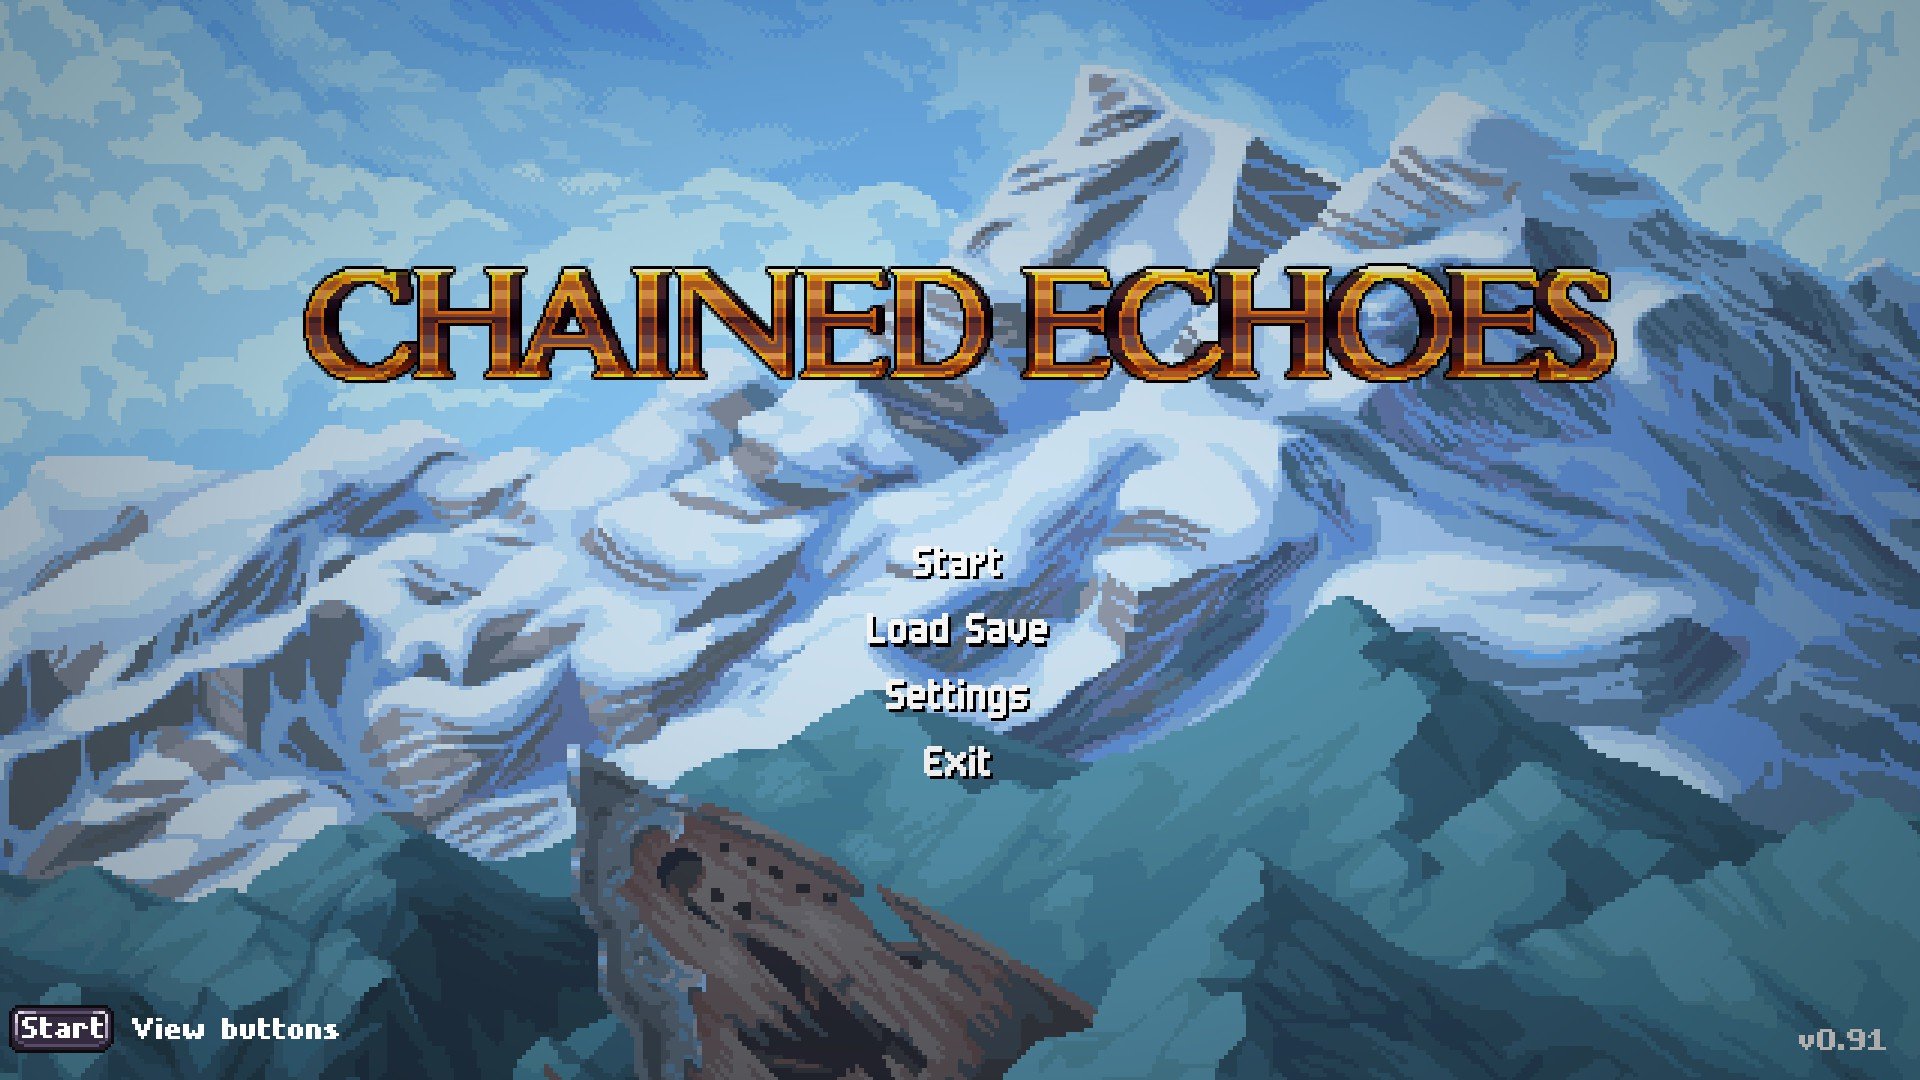 Chained Echoes Launching in December - RPGamer